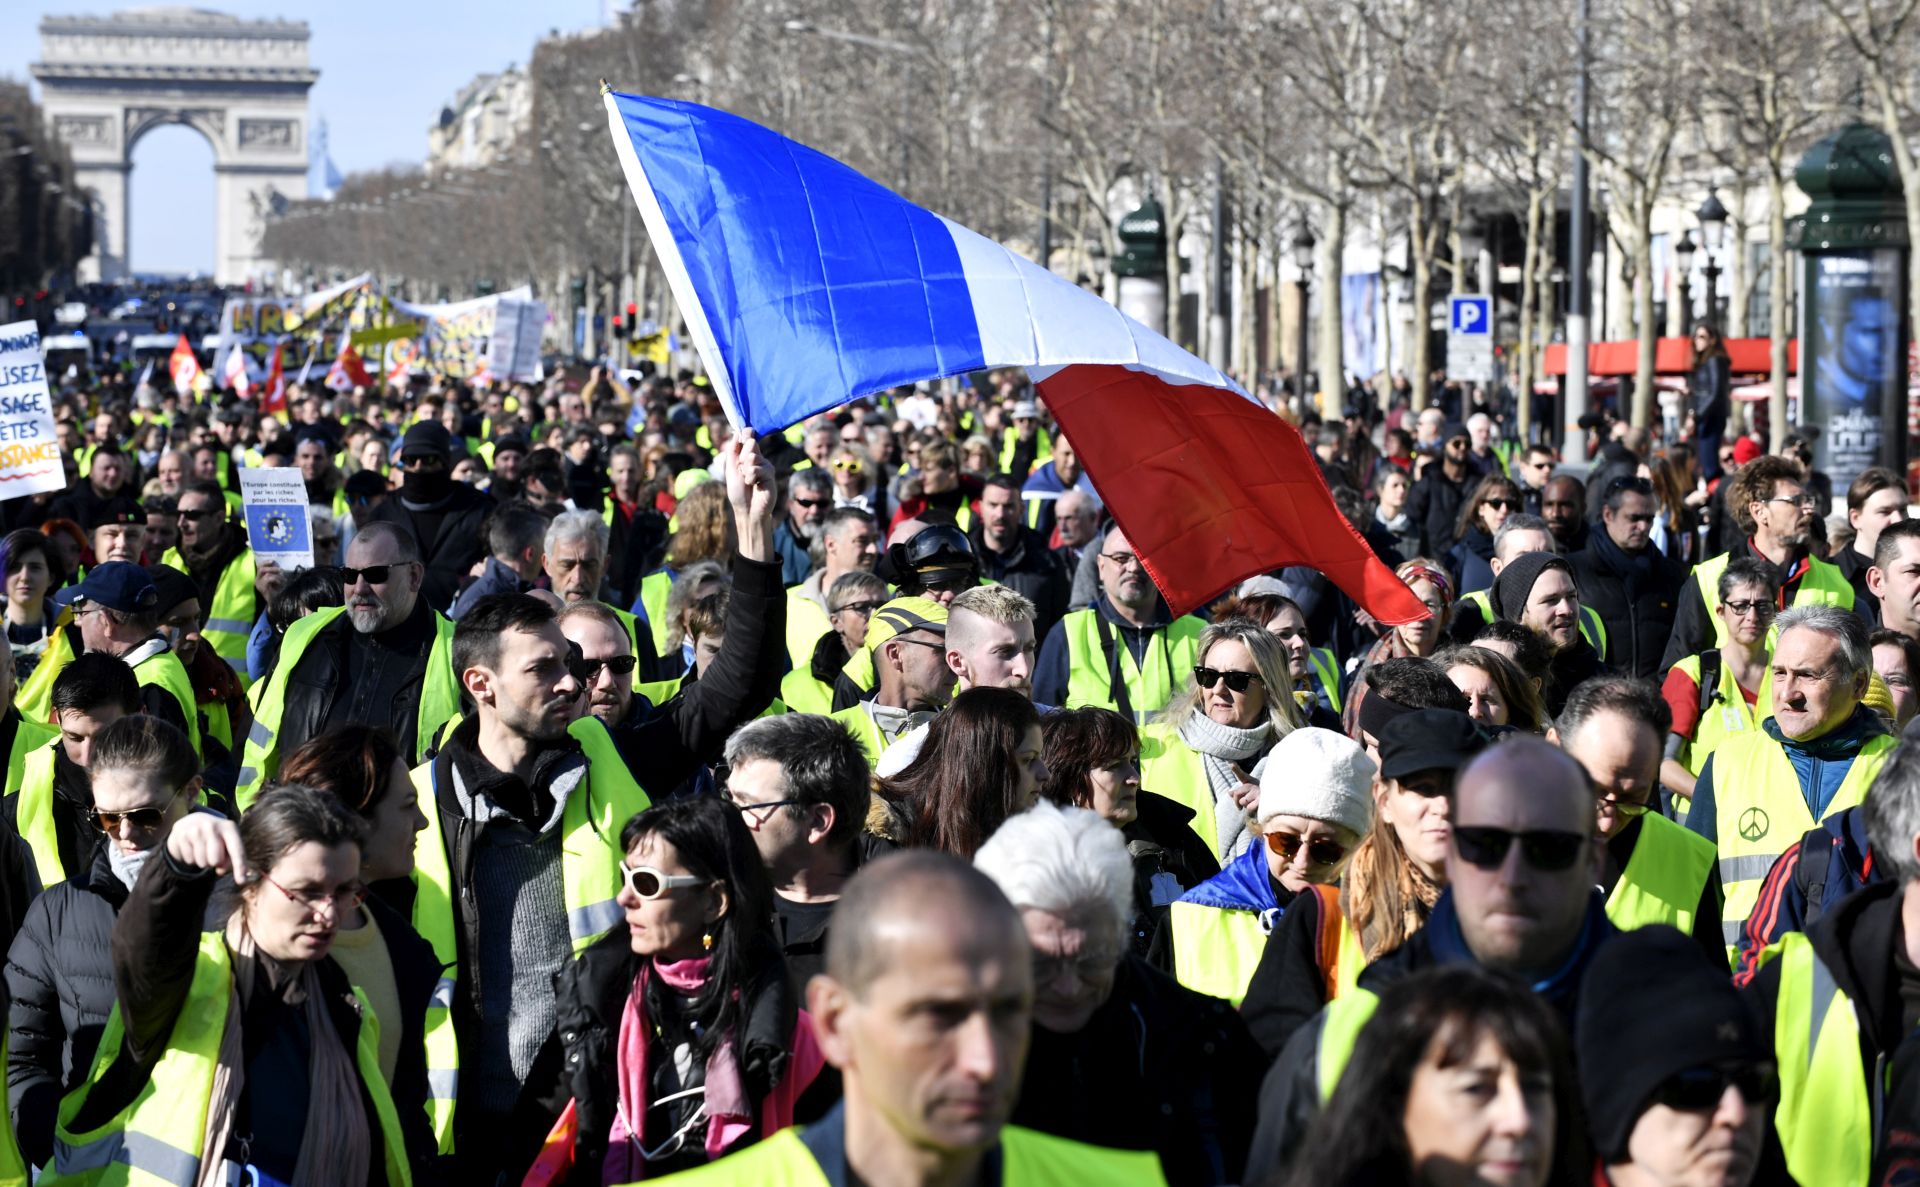 epa07377024 Protesters from the 'Gilets Jaunes' (Yellow Vests) movement participate in a demonstration to celebrate the movement's three-month birthday on the Champs Elysees avenue near the Arc de Triomphe in Paris, France, 17 February 2019. The so-called 'Gilets Jaunes' is a grassroots protest movement with supporters from a wide span of the political spectrum, that originally started with protest across the nation in late 2018 against high fuel prices.  EPA/JULIEN DE ROSA